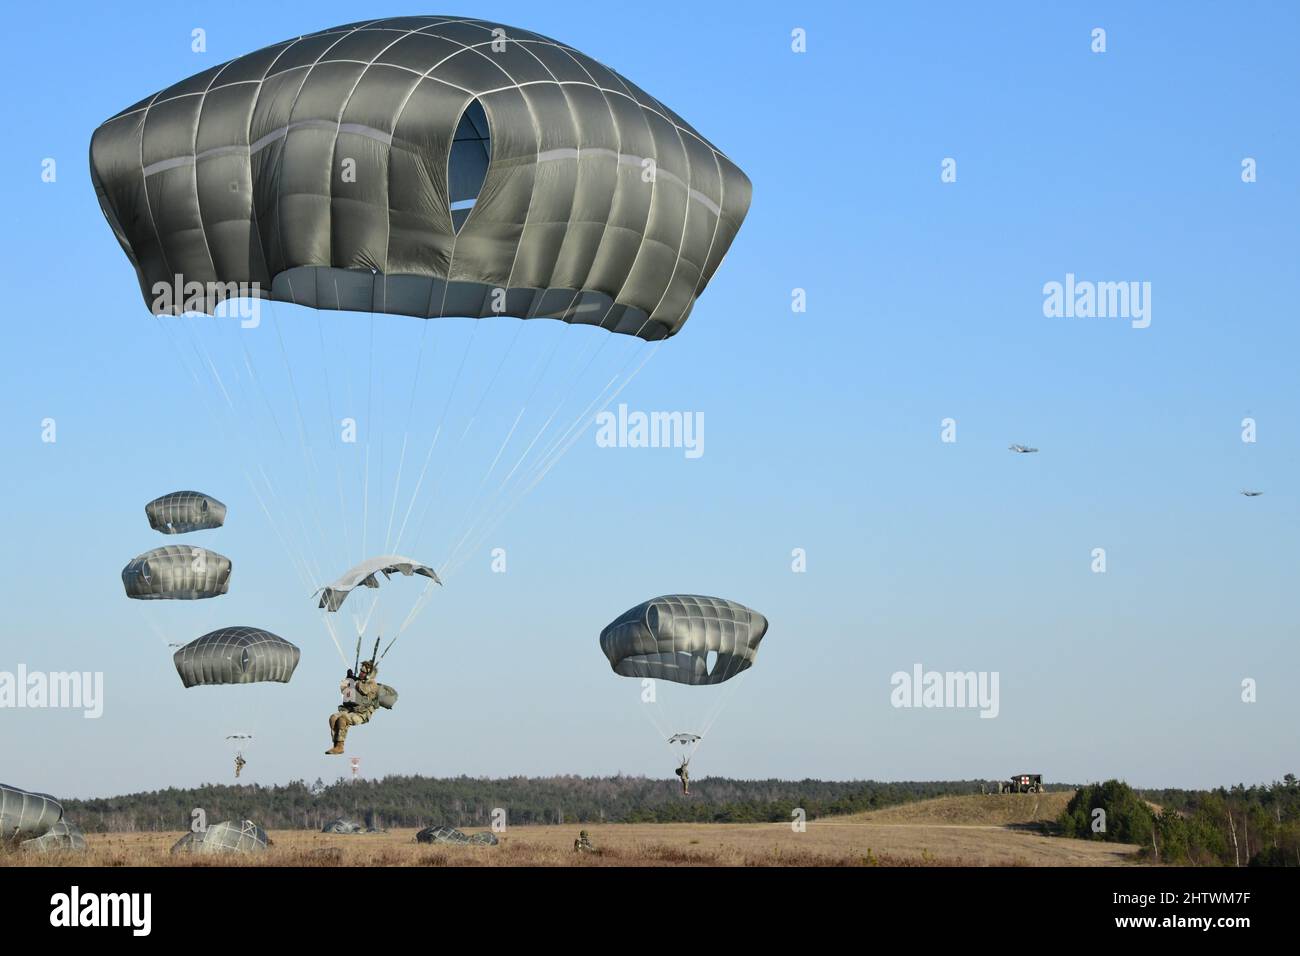 U.S. Army paratroopers assigned to 173rd Brigade Support Battalion, 173rd Airborne Brigade conduct an airborne operation in Grafenwoehr Training Area, Germany, March 1, 2022. The 173rd Airborne Brigade is the U.S. Army Contingency Response Force in Europe, capable of projecting ready forces anywhere in the U.S. European, Africa or Central Commands' areas of responsibility.. (U.S. Army photo by Spc. Ryan Parr) Stock Photo